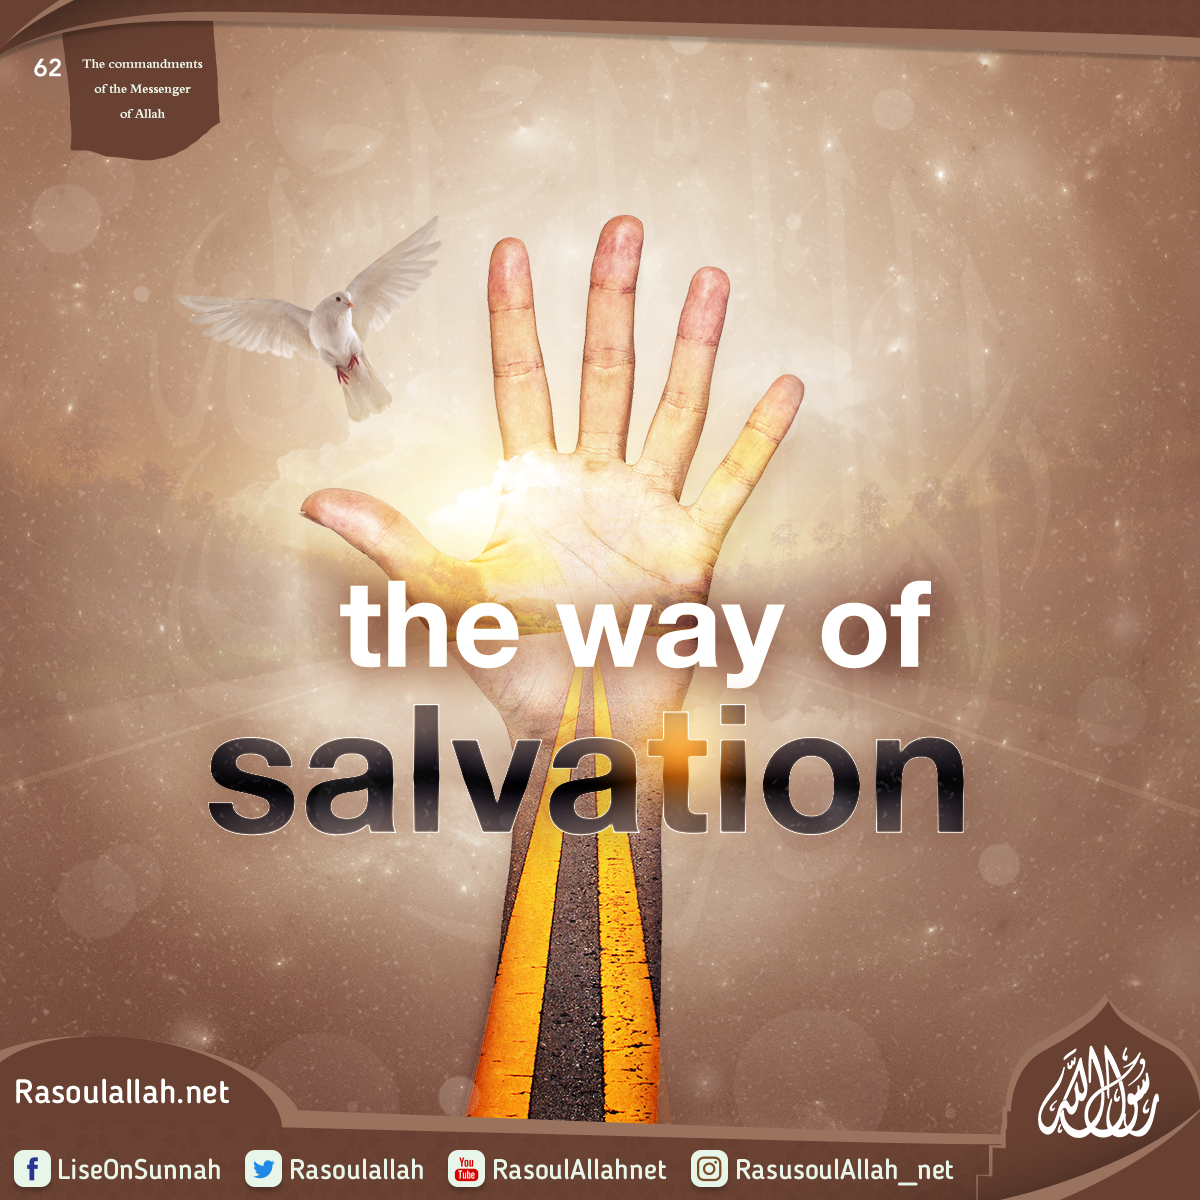 The way of salvation